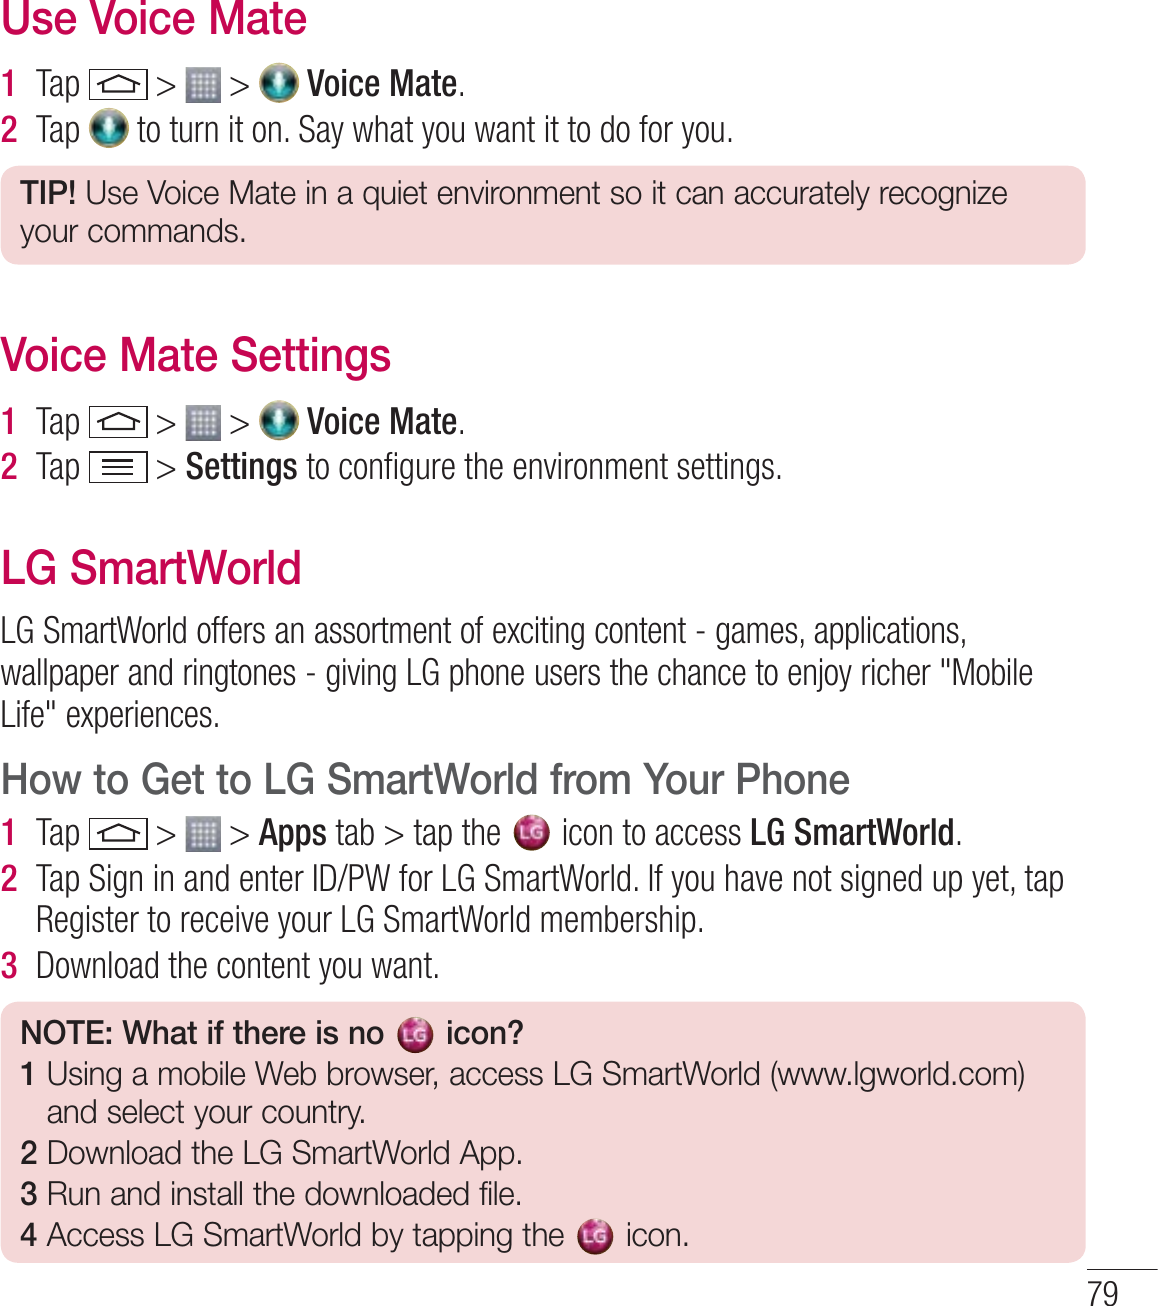 79Use Voice Mate1  Tap   &gt;   &gt;   Voice Mate.2  Tap   to turn it on. Say what you want it to do for you.TIP! Use Voice Mate in a quiet environment so it can accurately recognize your commands.Voice Mate Settings1  Tap   &gt;   &gt;   Voice Mate.2  Tap   &gt; Settings to conﬁgure the environment settings. LG SmartWorldLG SmartWorld offers an assortment of exciting content - games, applications, wallpaper and ringtones - giving LG phone users the chance to enjoy richer &quot;Mobile Life&quot; experiences.How to Get to LG SmartWorld from Your Phone1  Tap   &gt;   &gt; Apps tab &gt; tap the   icon to access LG SmartWorld.2  Tap Sign in and enter ID/PW for LG SmartWorld. If you have not signed up yet, tap Register to receive your LG SmartWorld membership.3  Download the content you want.NOTE: What if there is no   icon? 1  Using a mobile Web browser, access LG SmartWorld (www.lgworld.com) and select your country. 2  Download the LG SmartWorld App. 3  Run and install the downloaded file.4  Access LG SmartWorld by tapping the  icon.